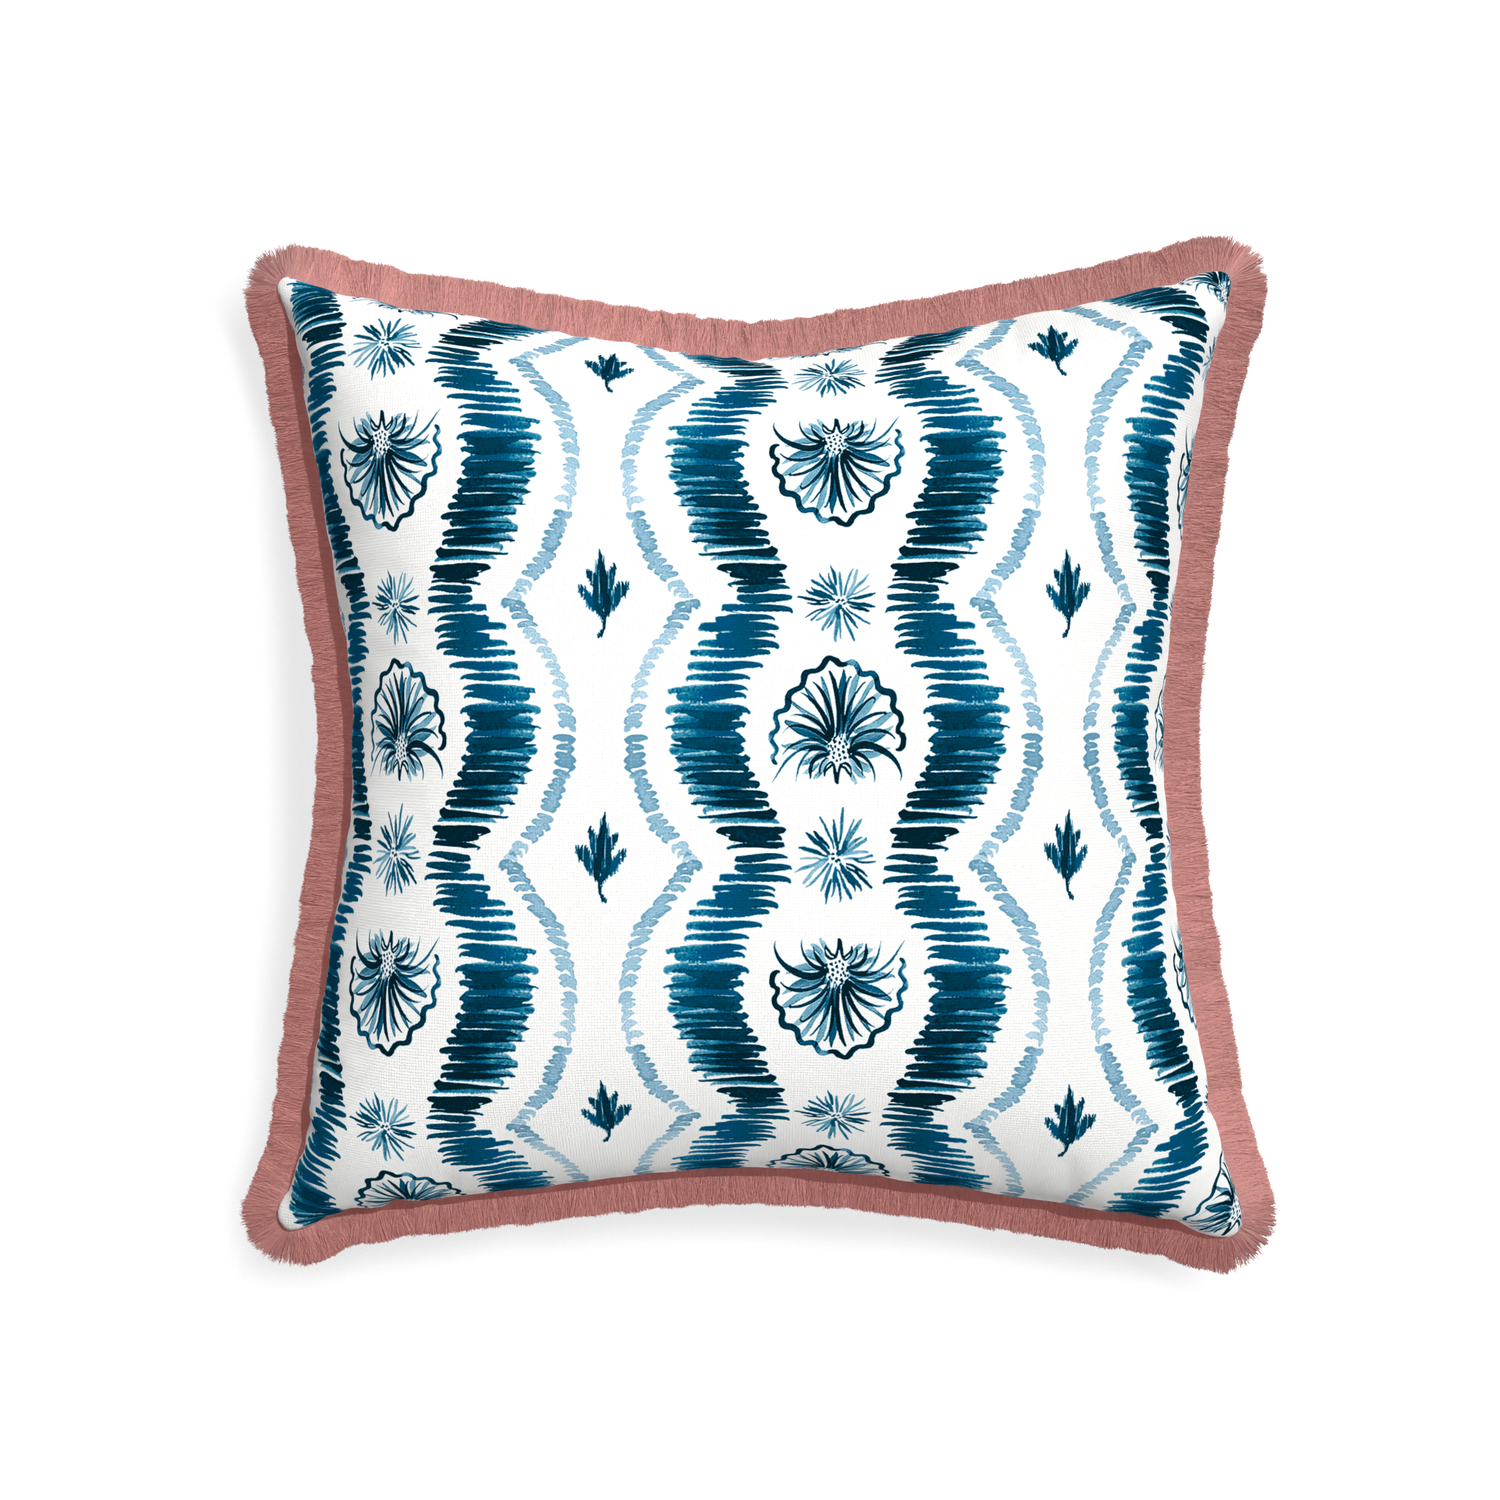 22-square alice custom blue ikatpillow with d fringe on white background